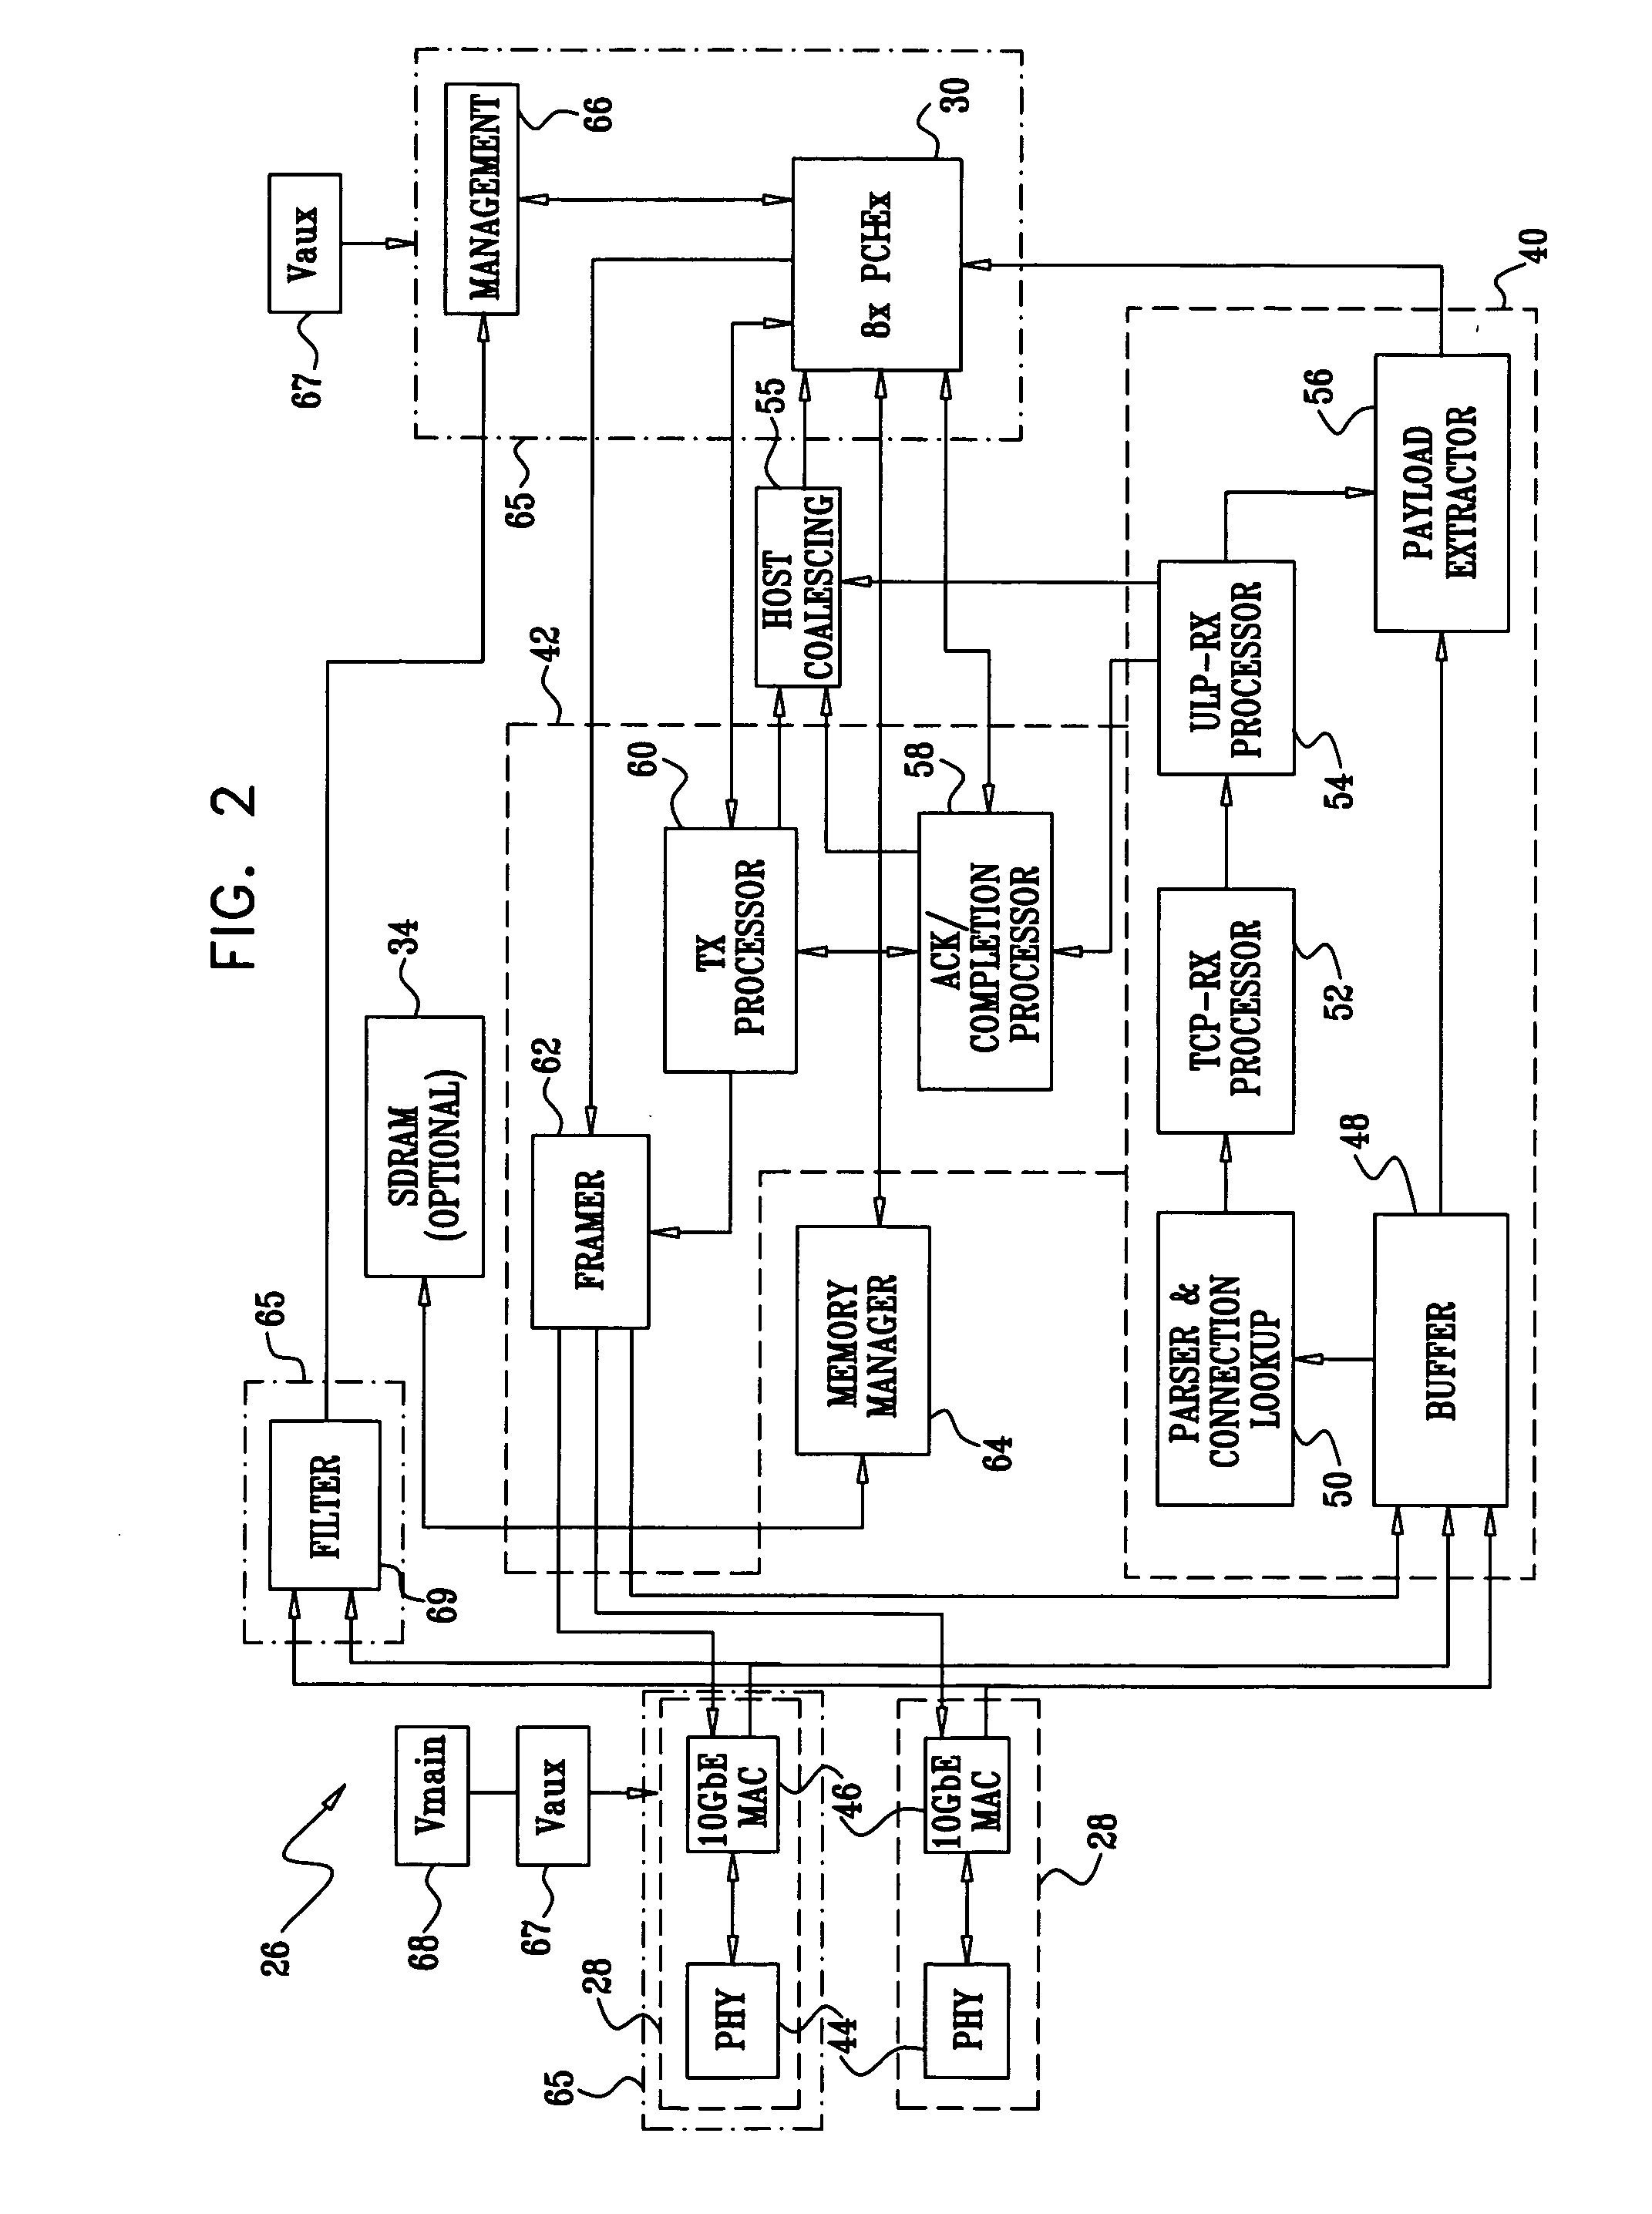 Efficient handling of work requests in a network interface device